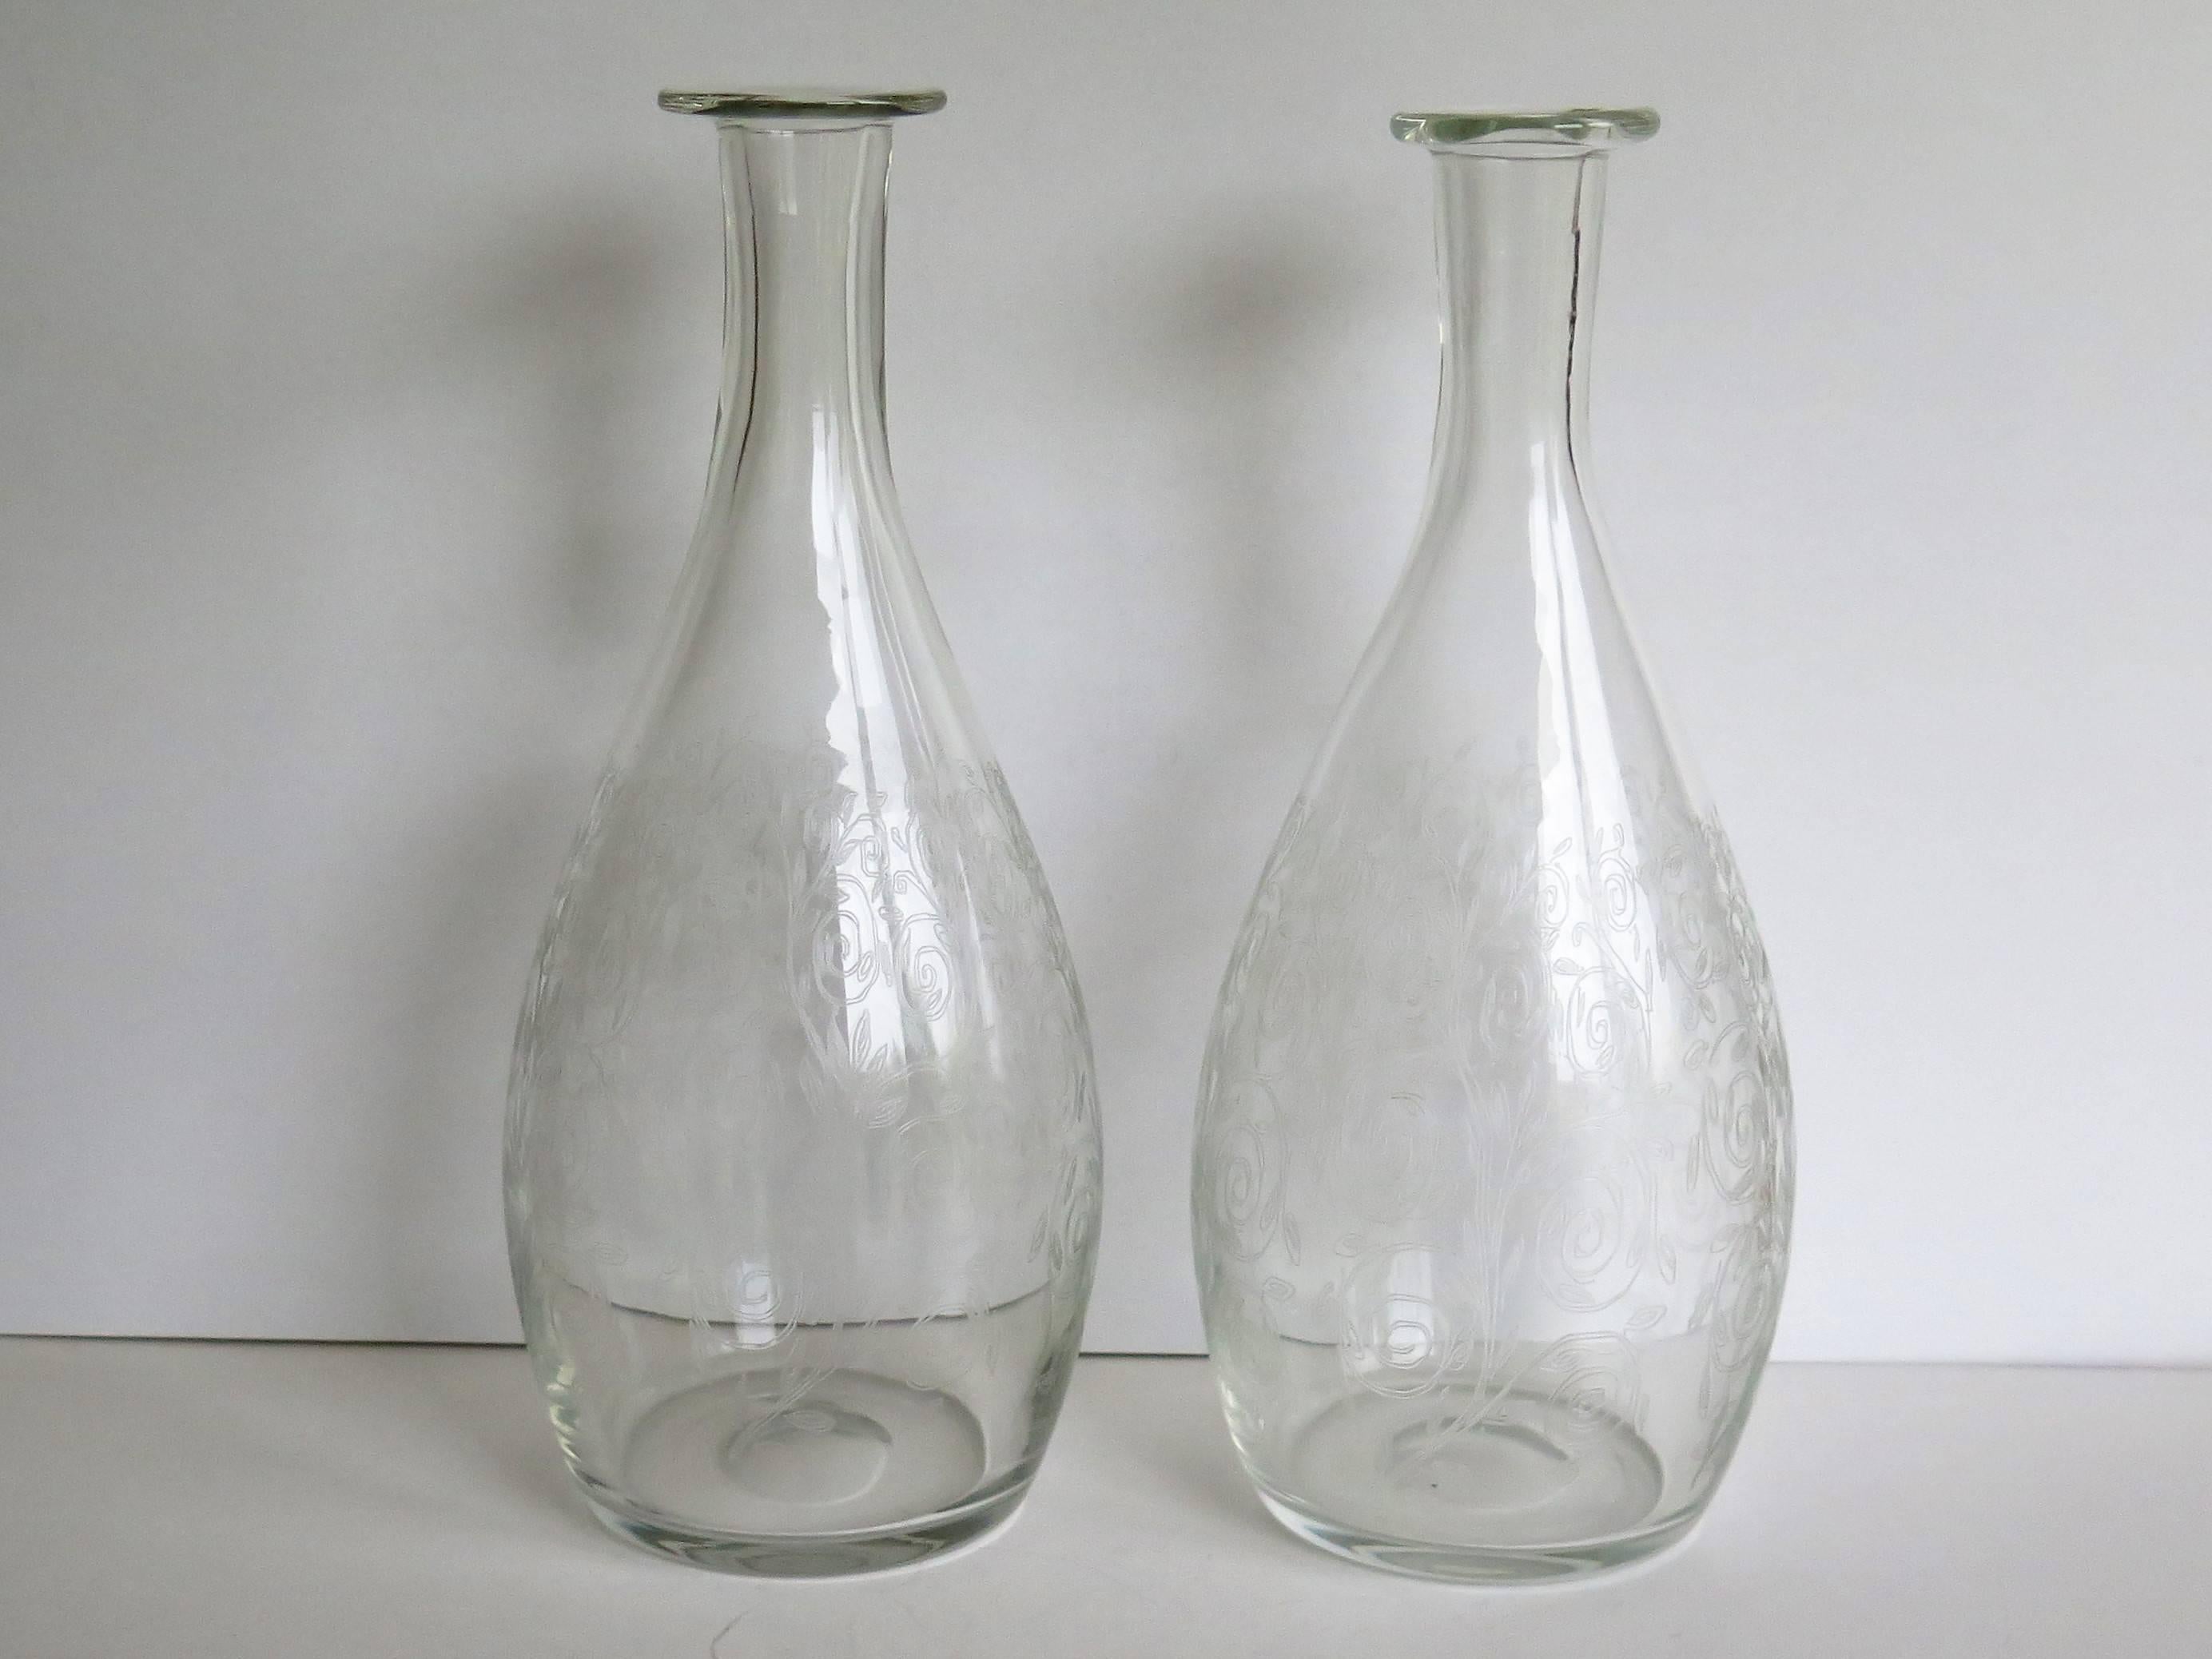 Victorian Fine Pair of Glass Carafes, Jugs or Vases Hand-blown and engraved, Late 19th C.